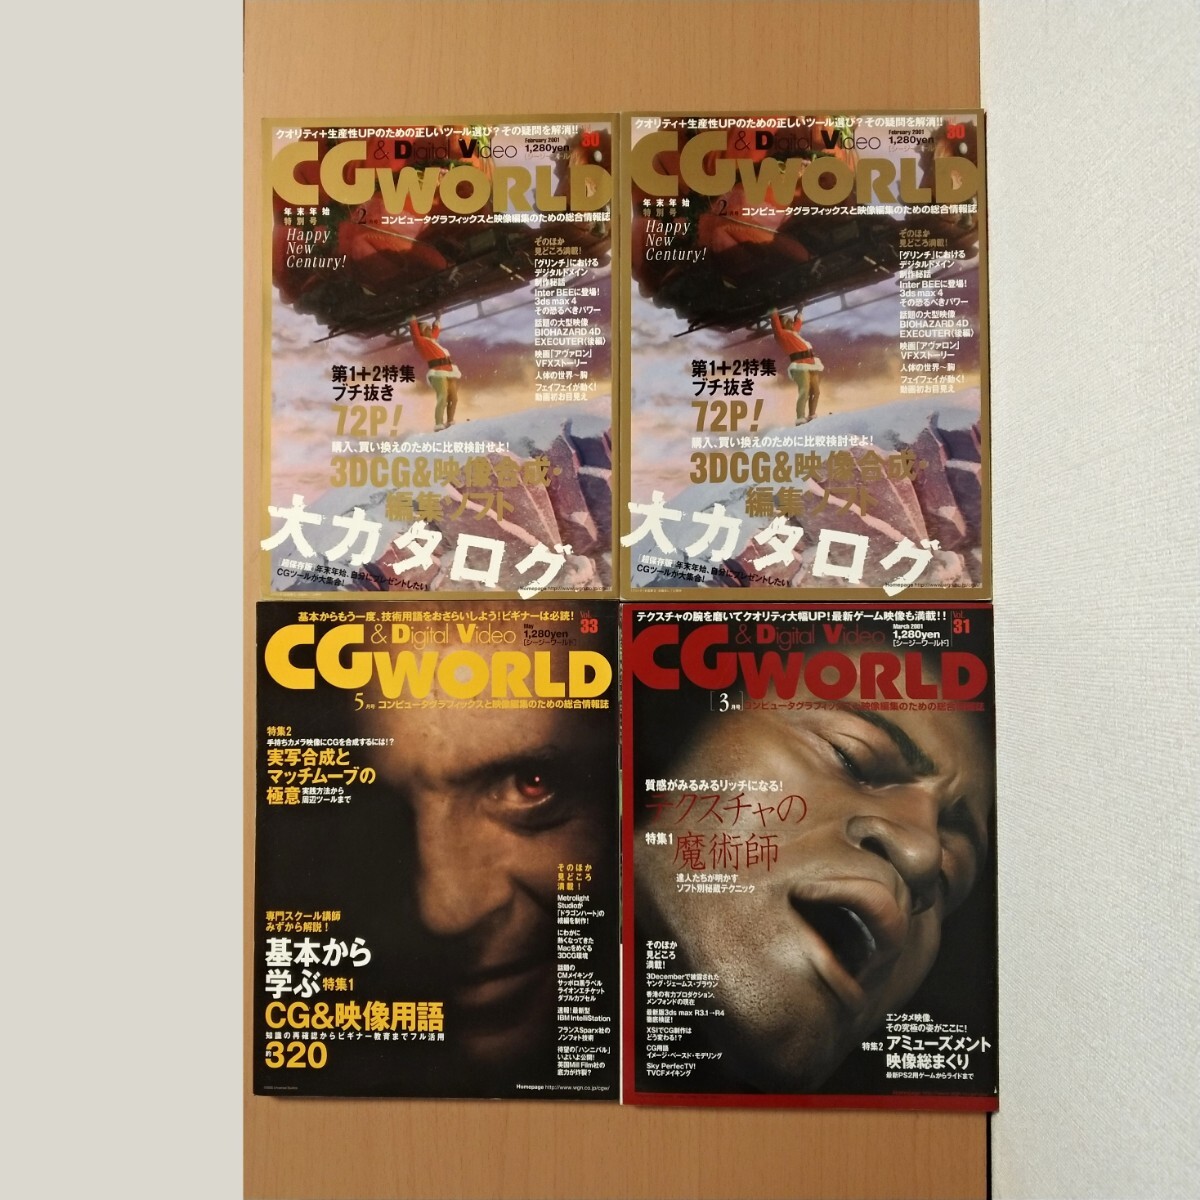 CGWORLD Vol.30(2001 year 02 month number )~Vol.40(2001 year 12 month number ) CG integrated magazine bo-n digital issue 